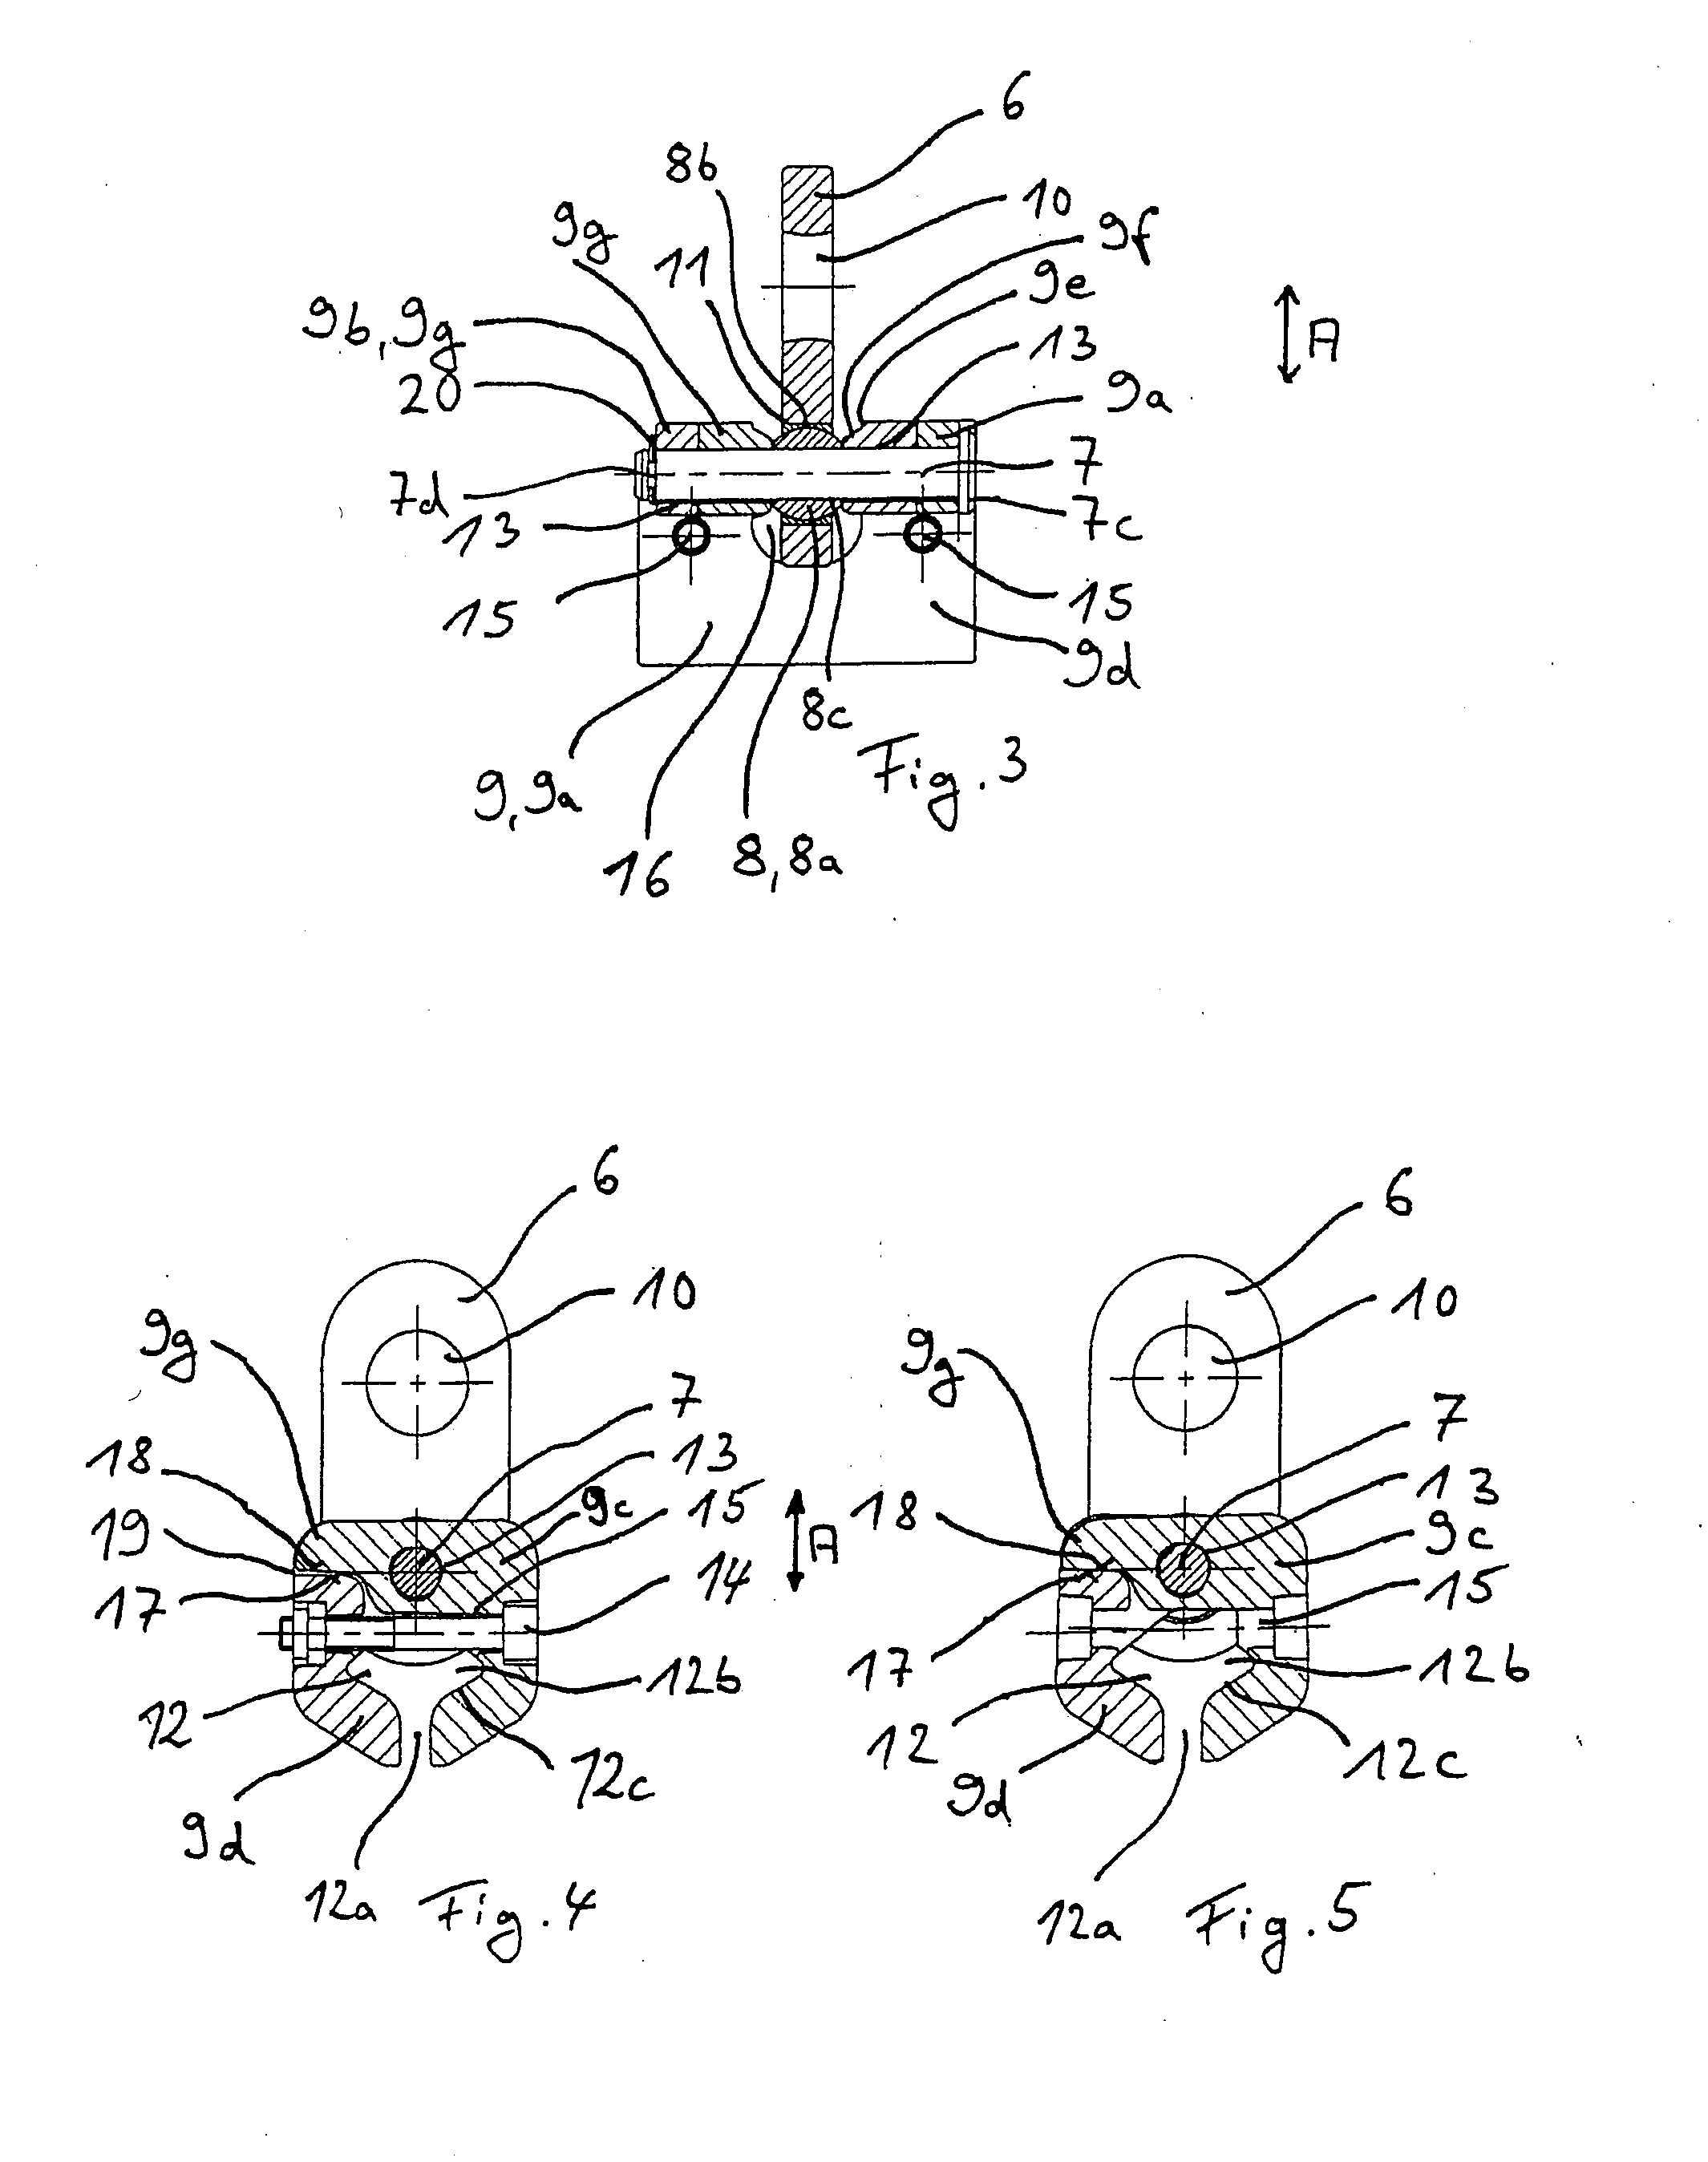 Device for suspending a rail of an overhead conveyor or a hoisting machine